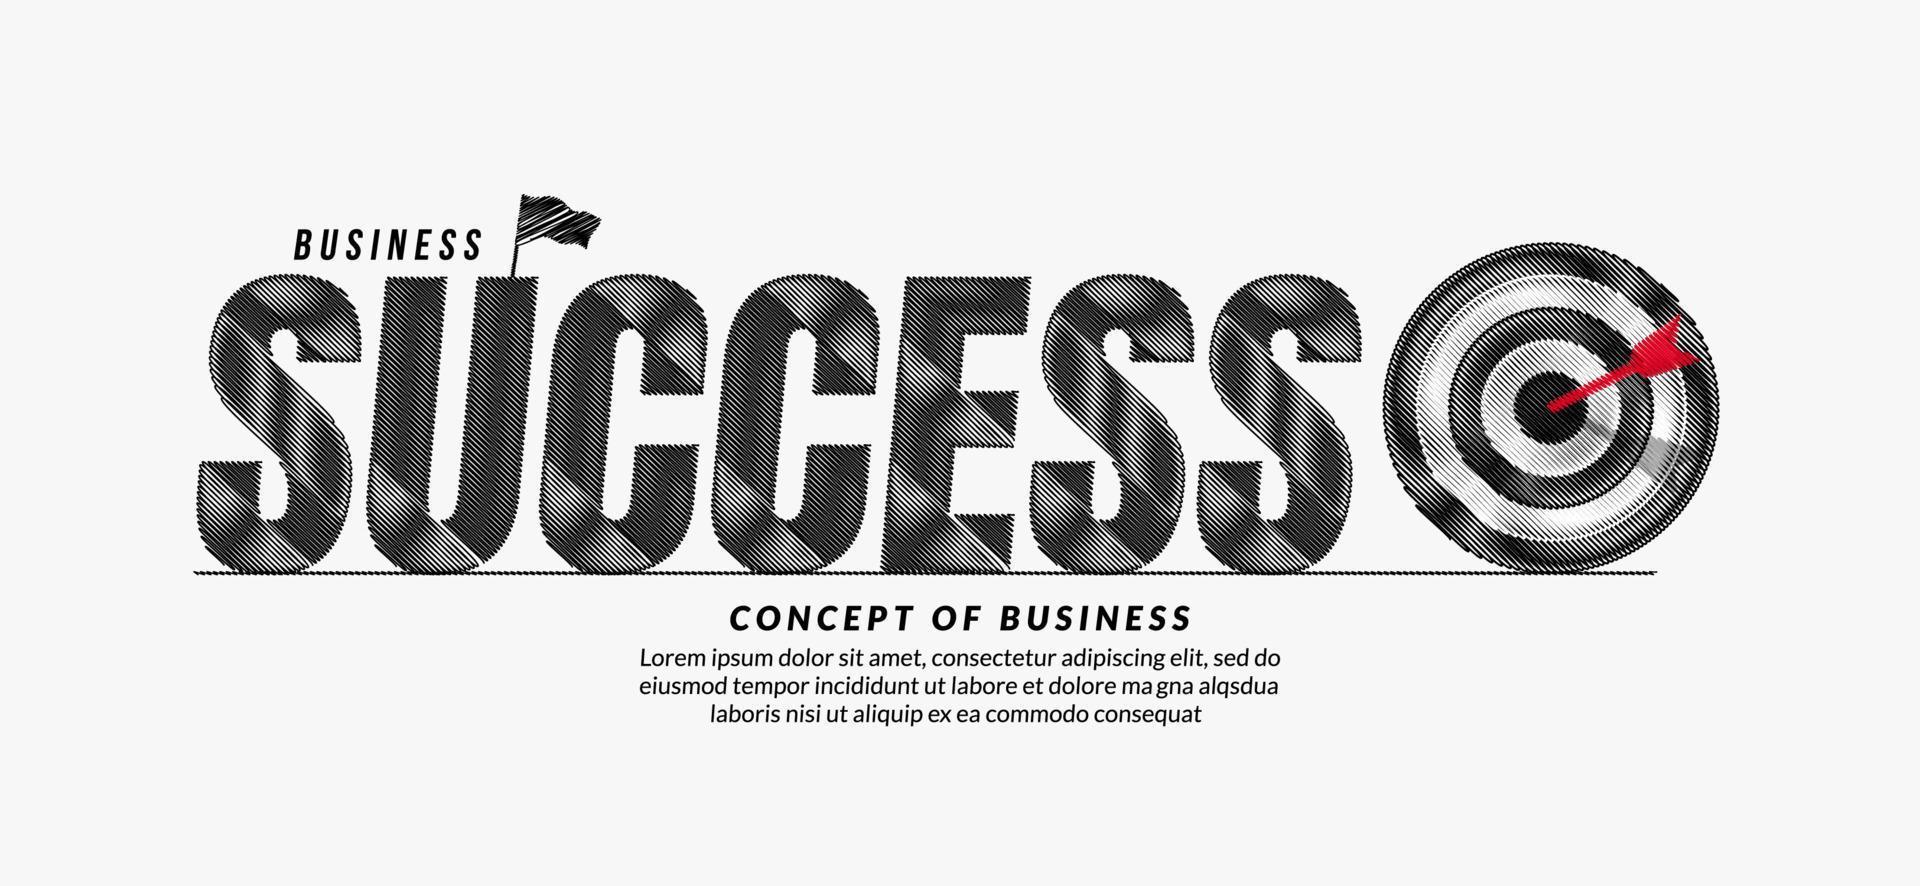 Success scribble text design background, business target lettering typography concept, Business motivation quote vector